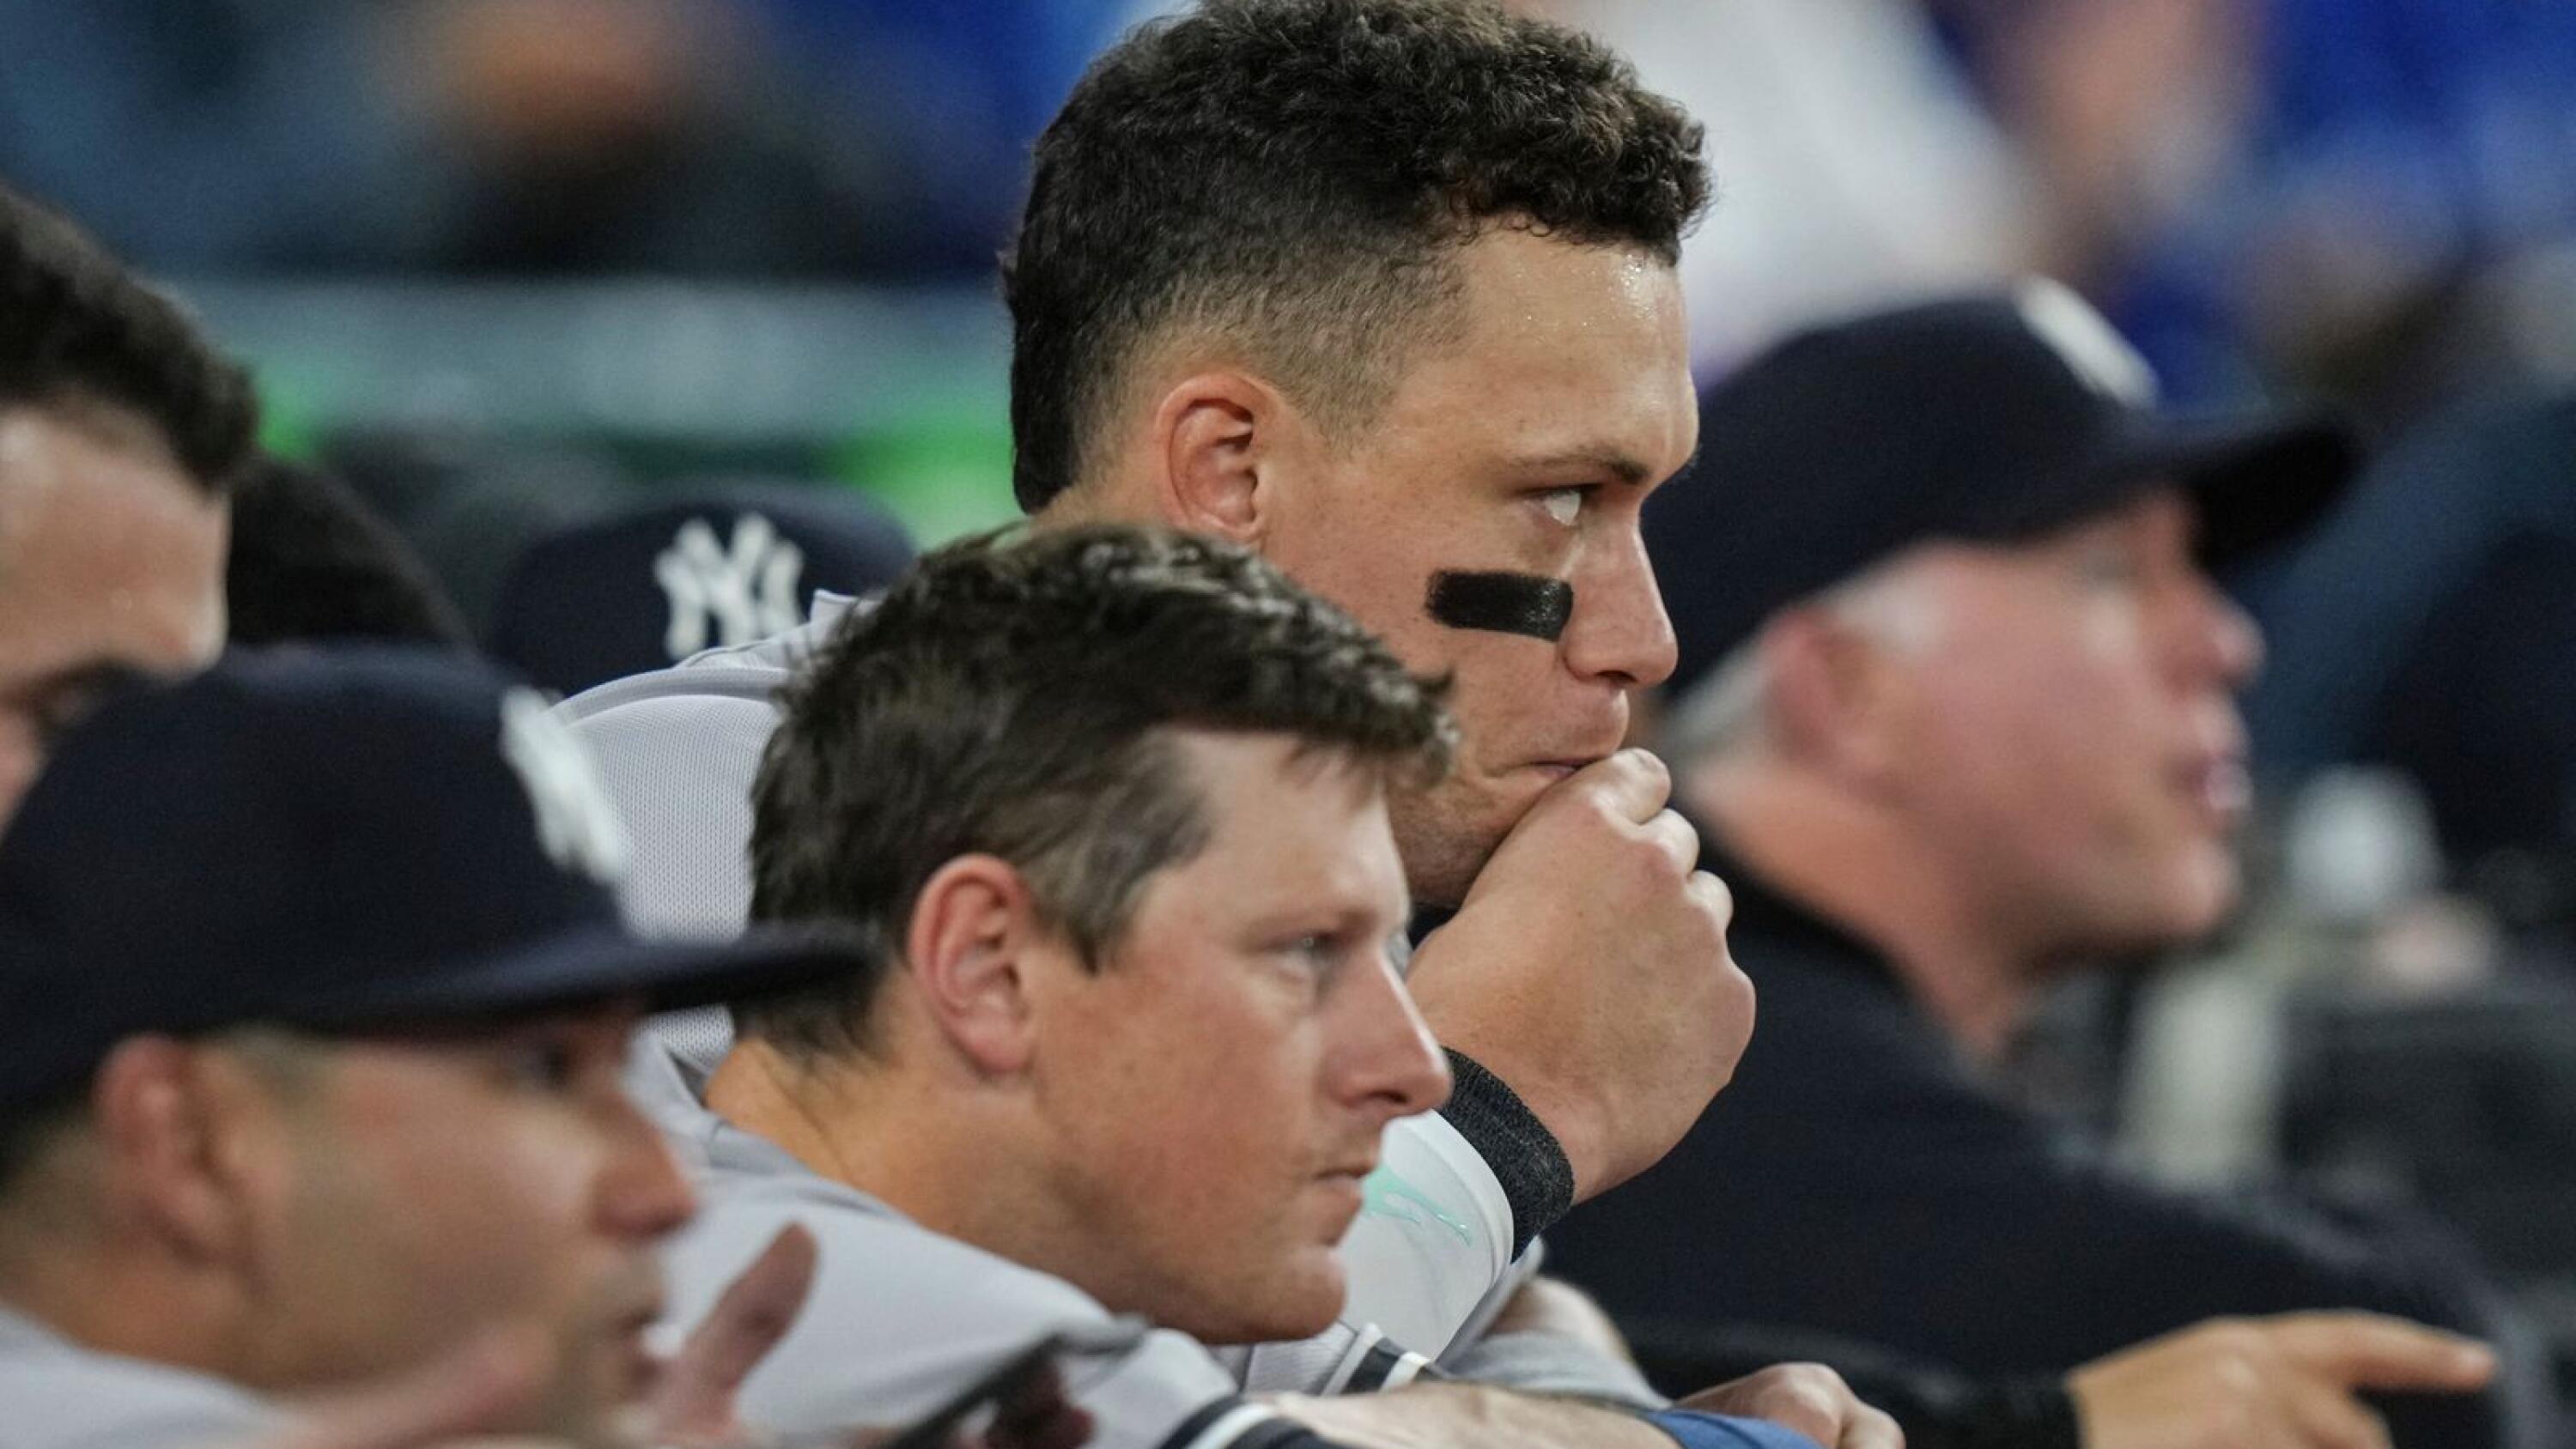 Yankees designated hitters are hitless in the postseason